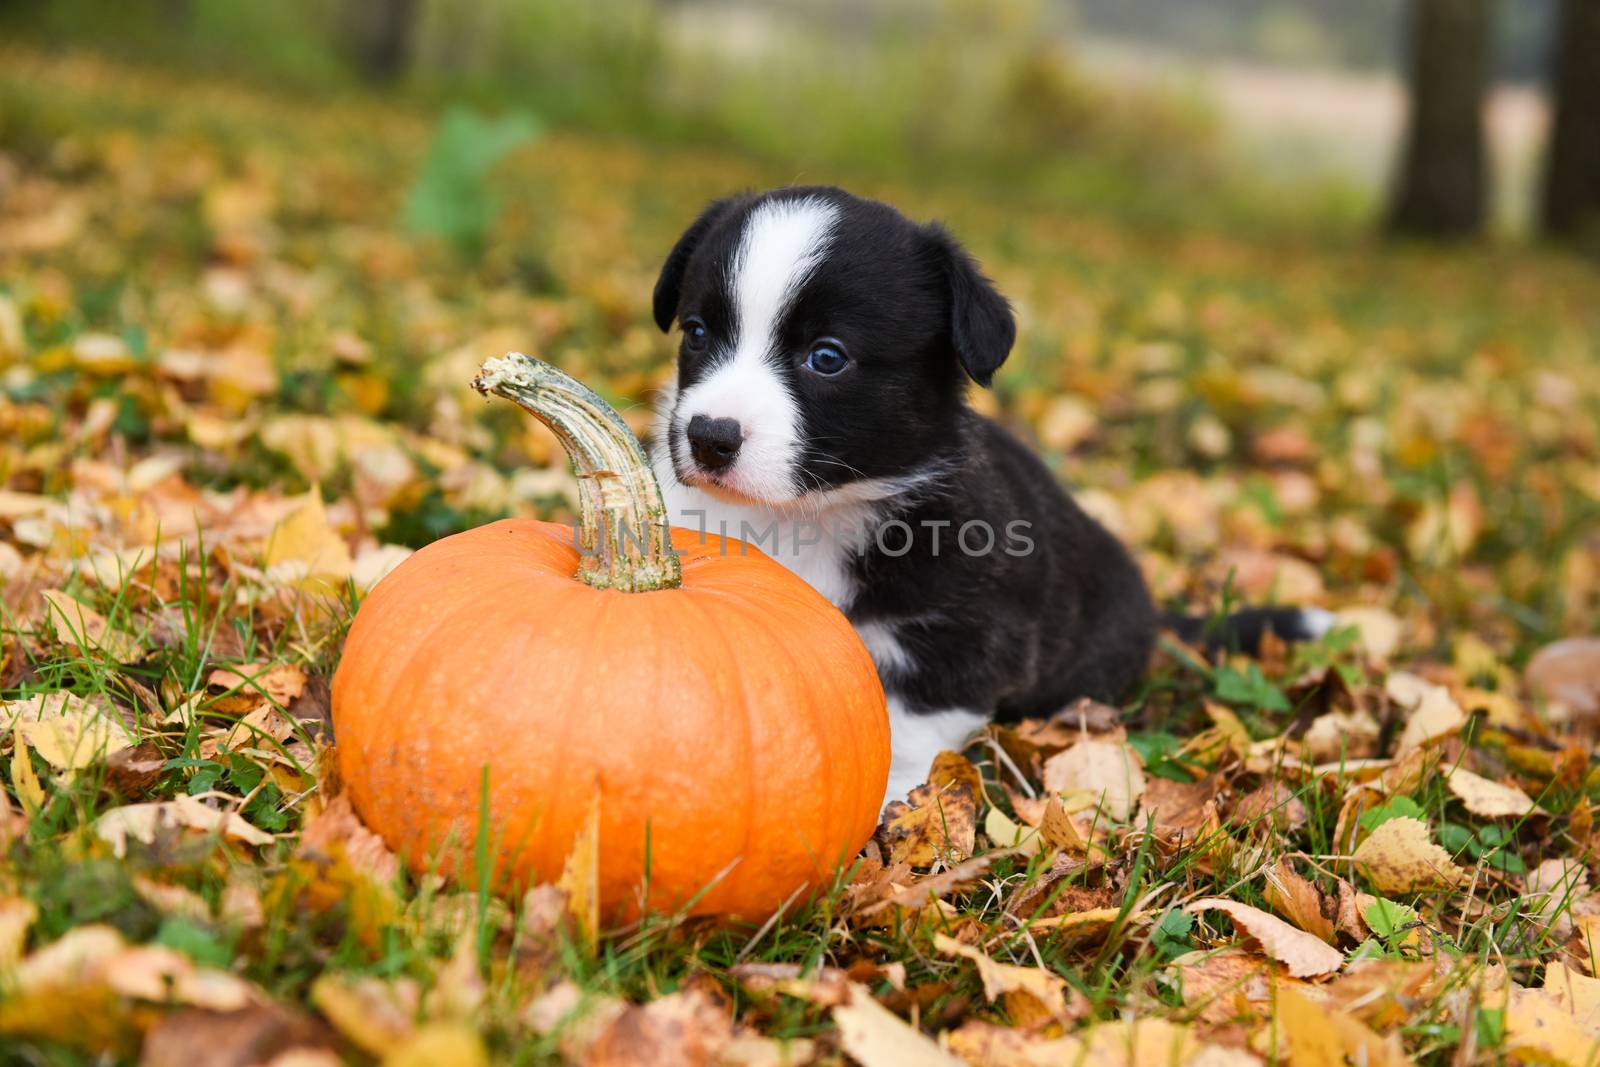 corgi puppy dog with a pumpkin on an autumn background by infinityyy